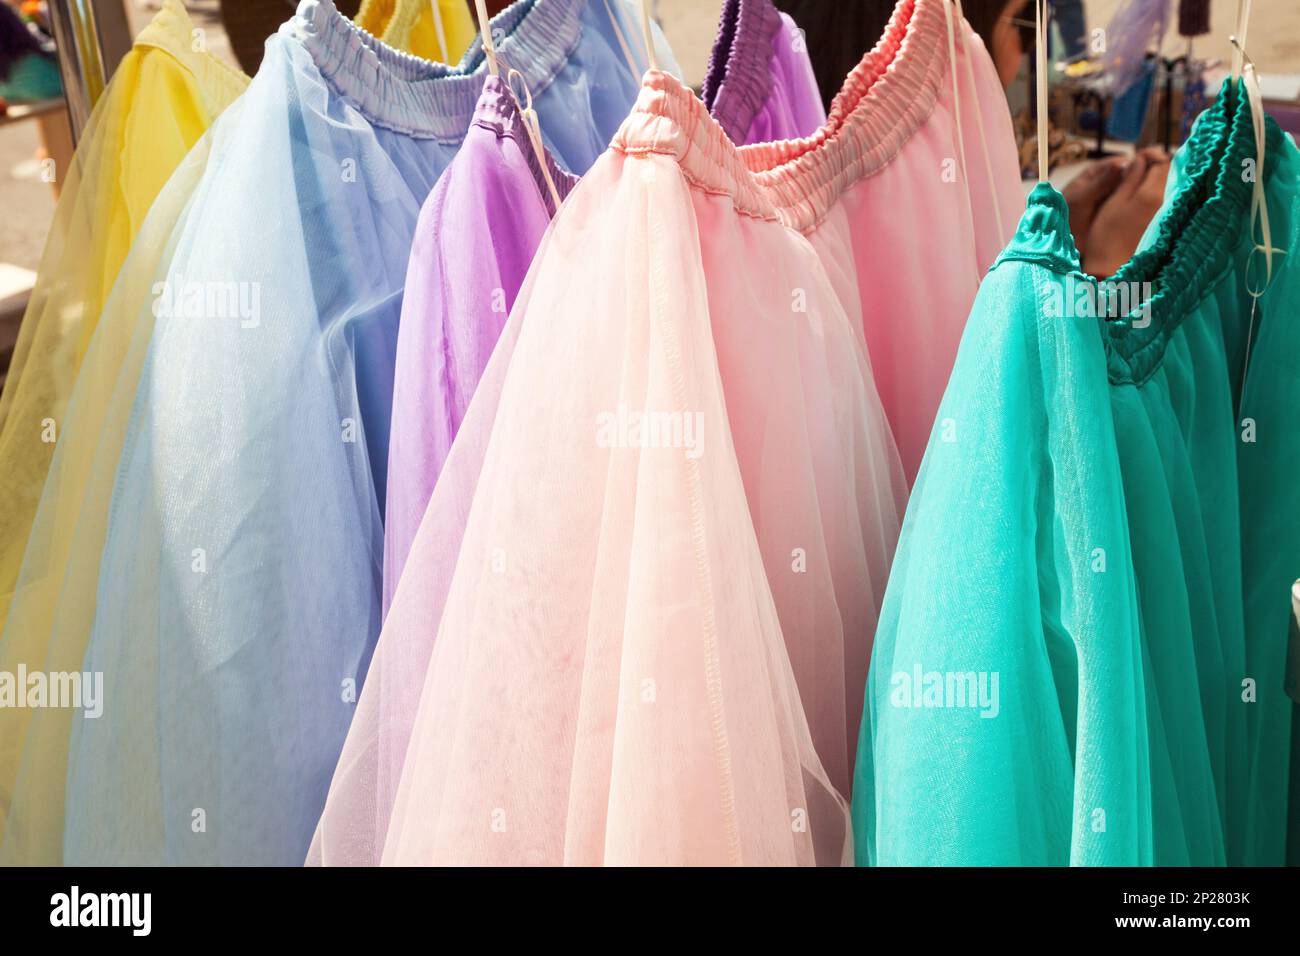 Row of hanging colorful gauze skirts at a clothing store. Brightly colored performance costumes background Stock Photo